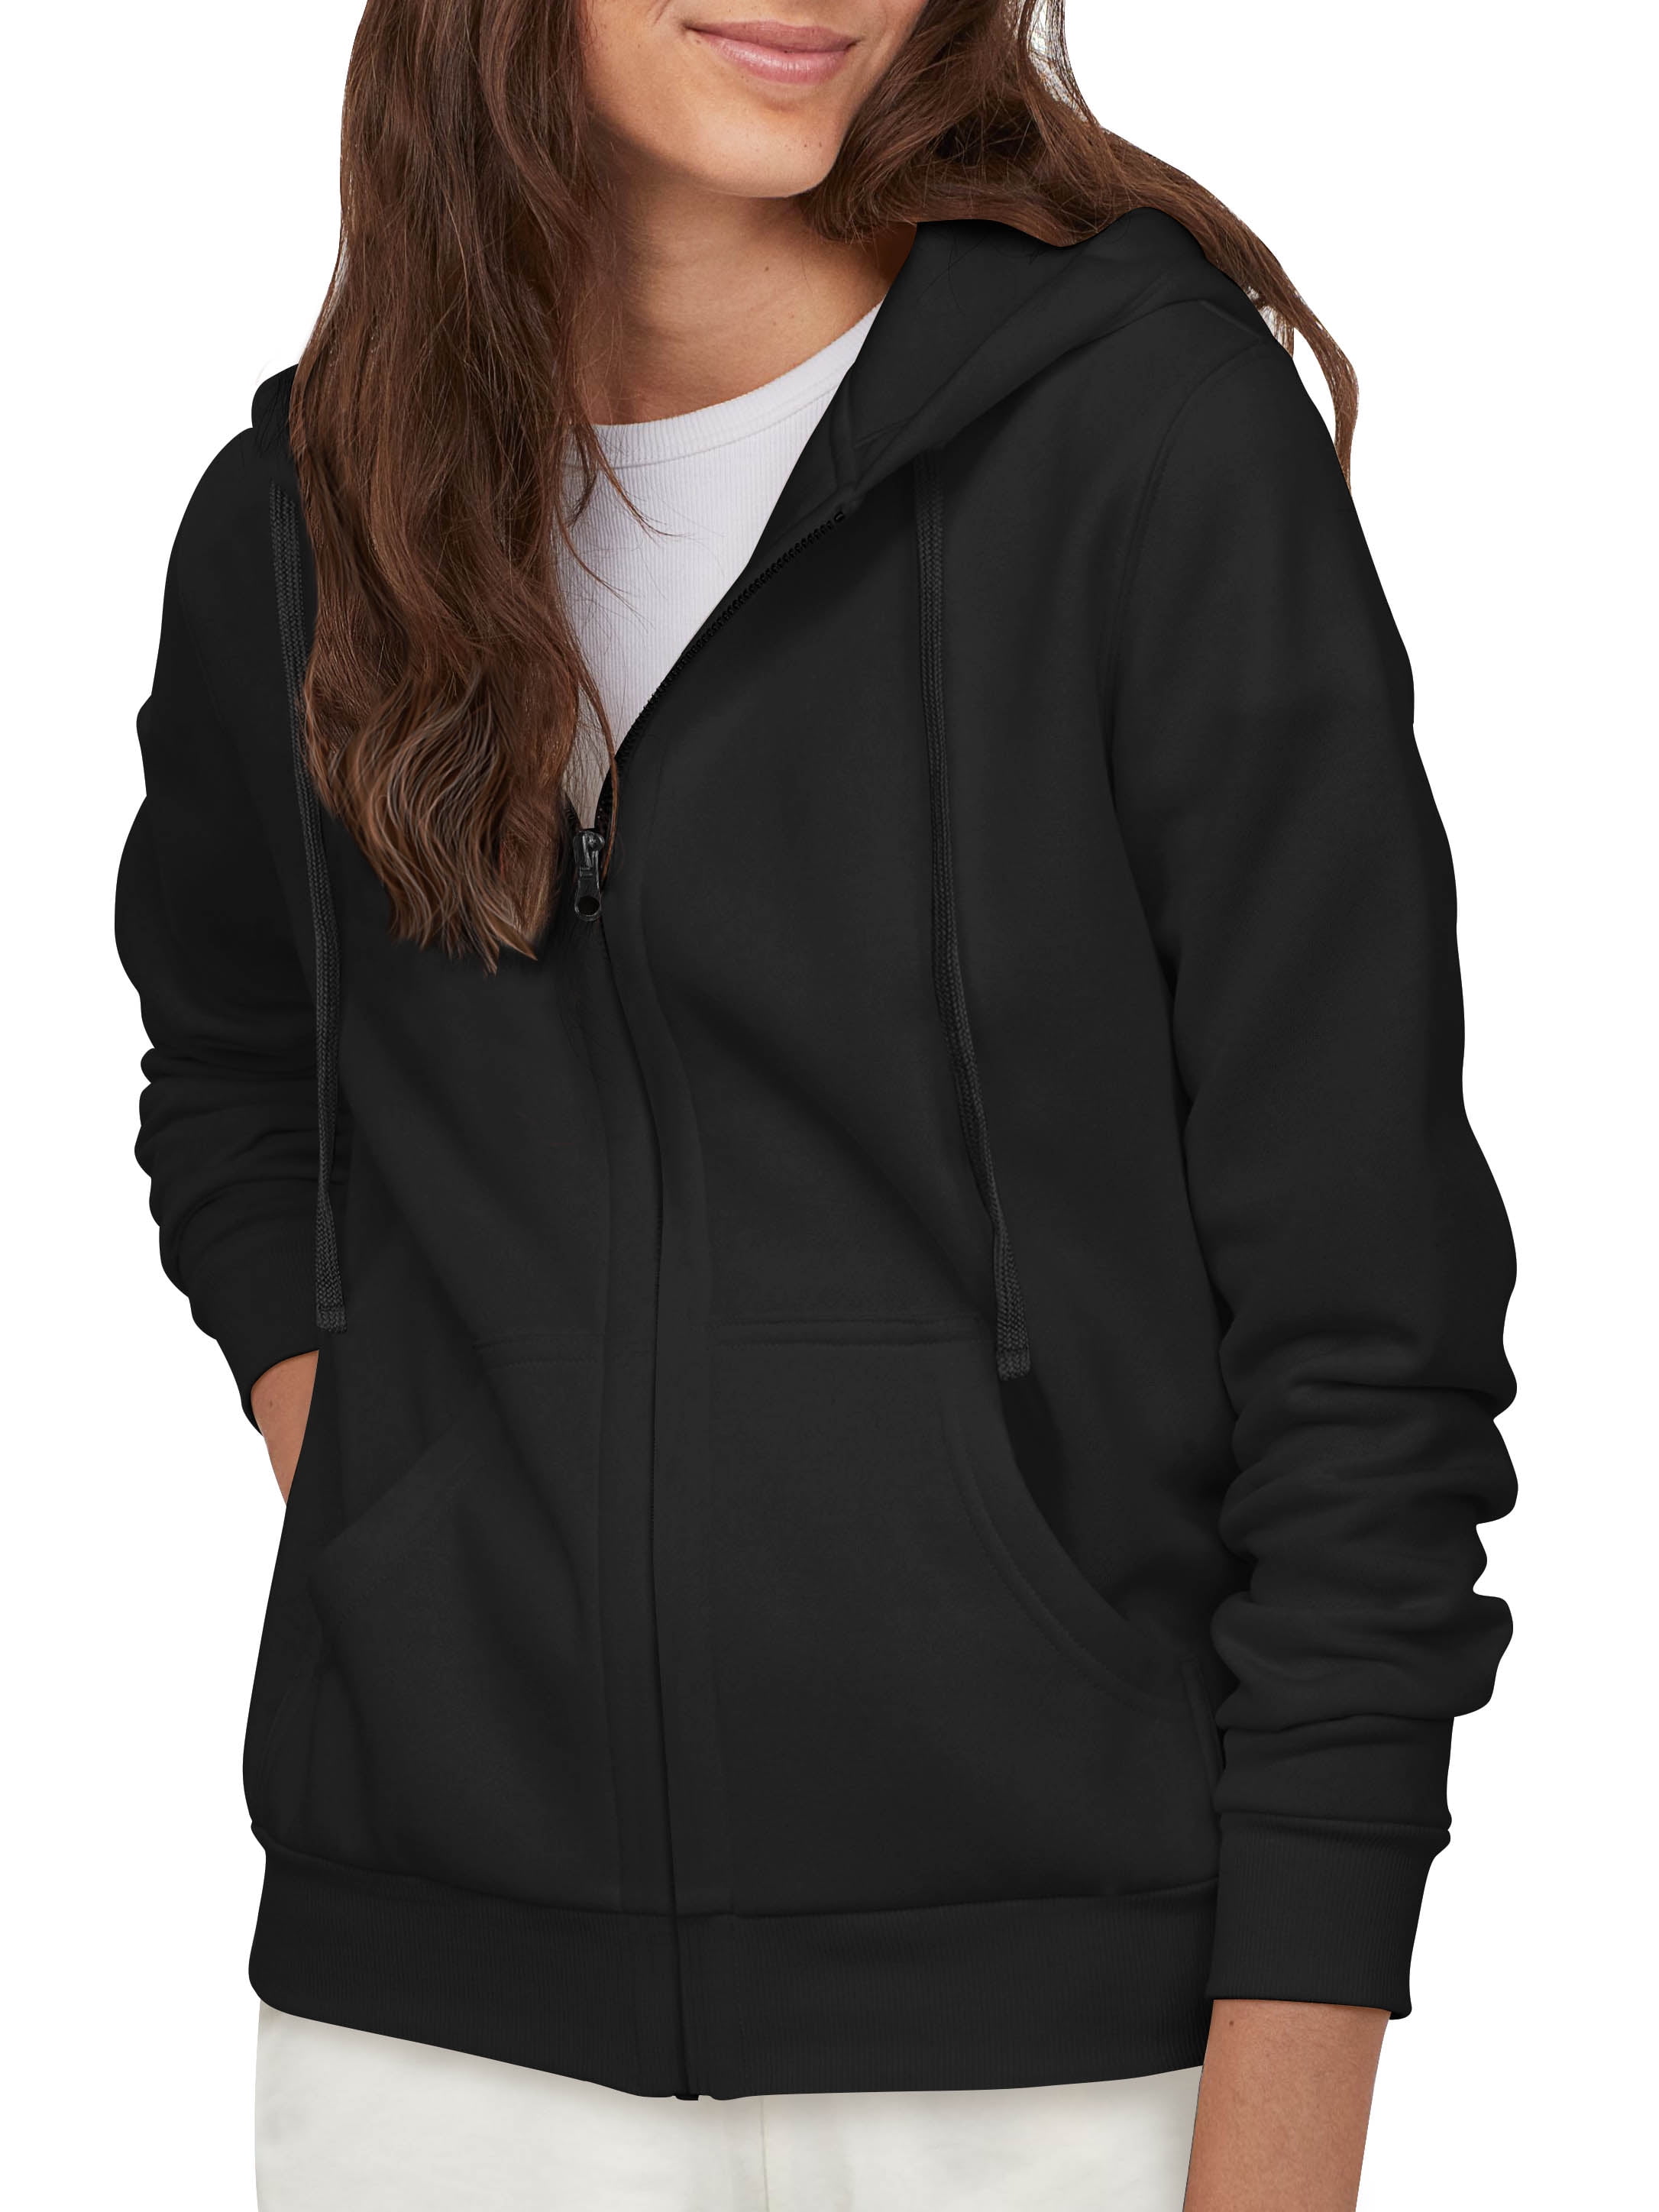 Hat and Beyond Women's Comfortable Hoodie Wrinkle Resistant Cotton Face ...